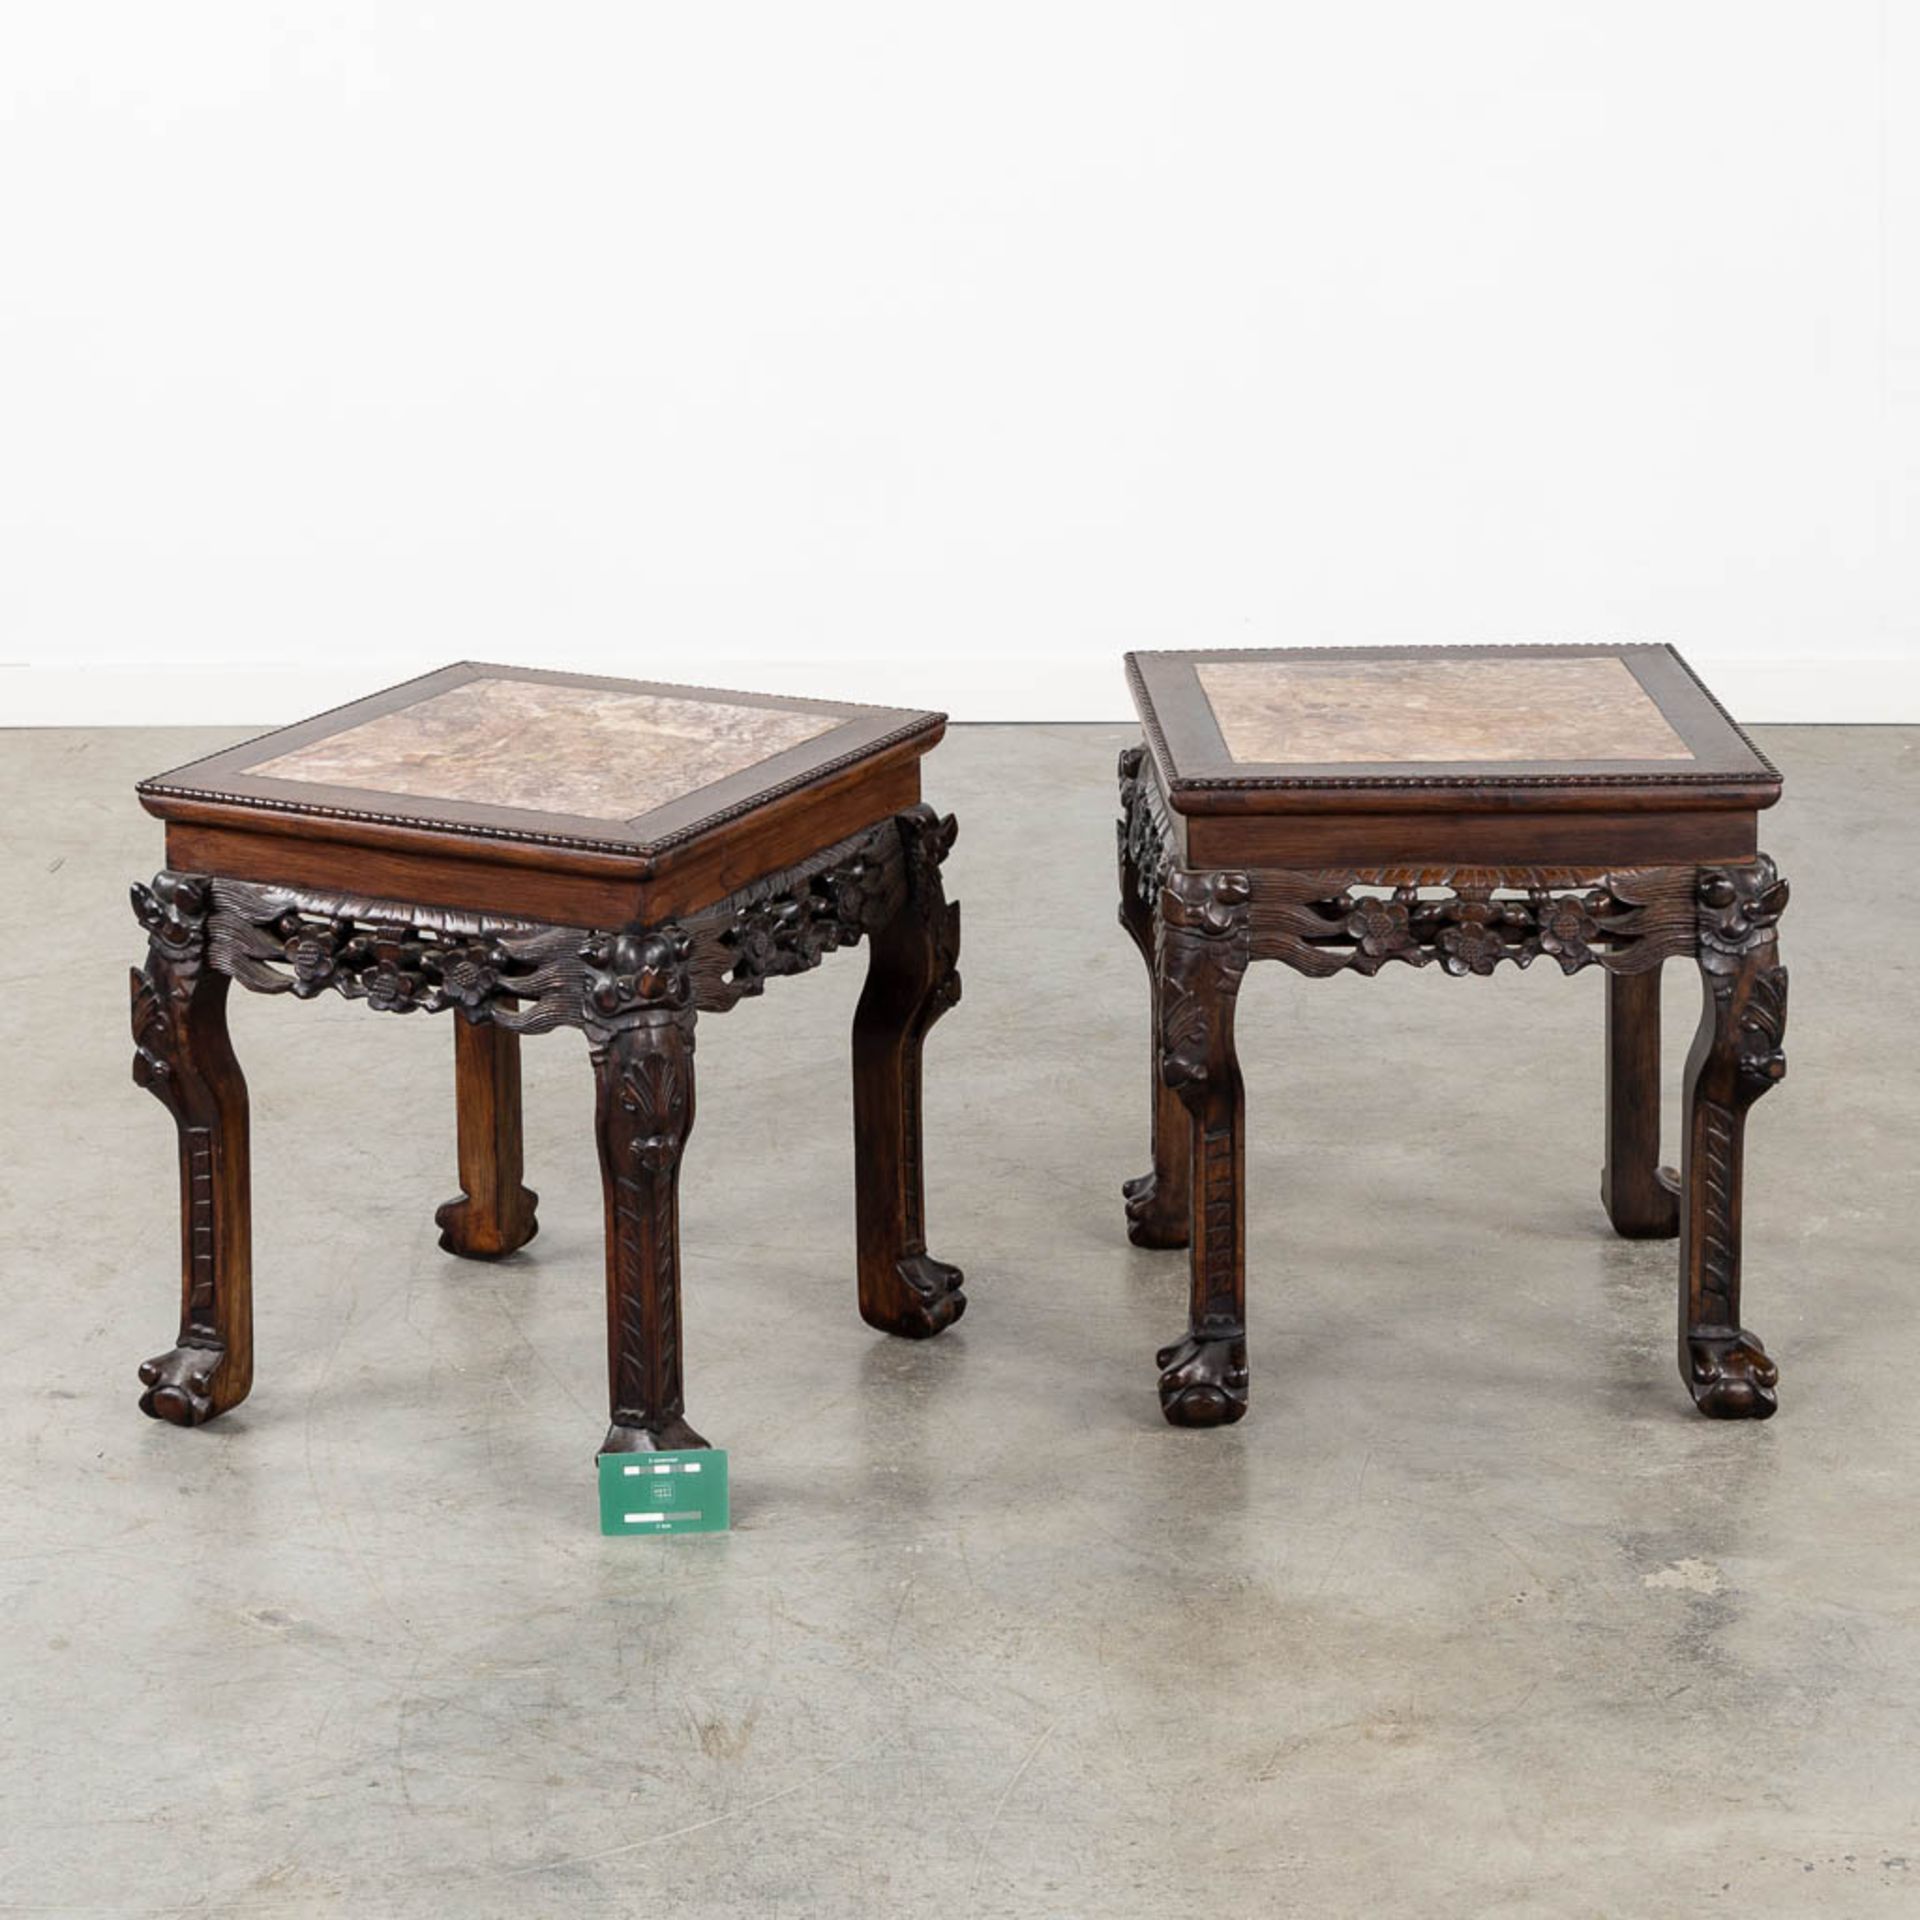 A pair of square Chinese side tables, hardwood with a marble top. (L:44 x W:44 x H:46 cm) - Bild 2 aus 11